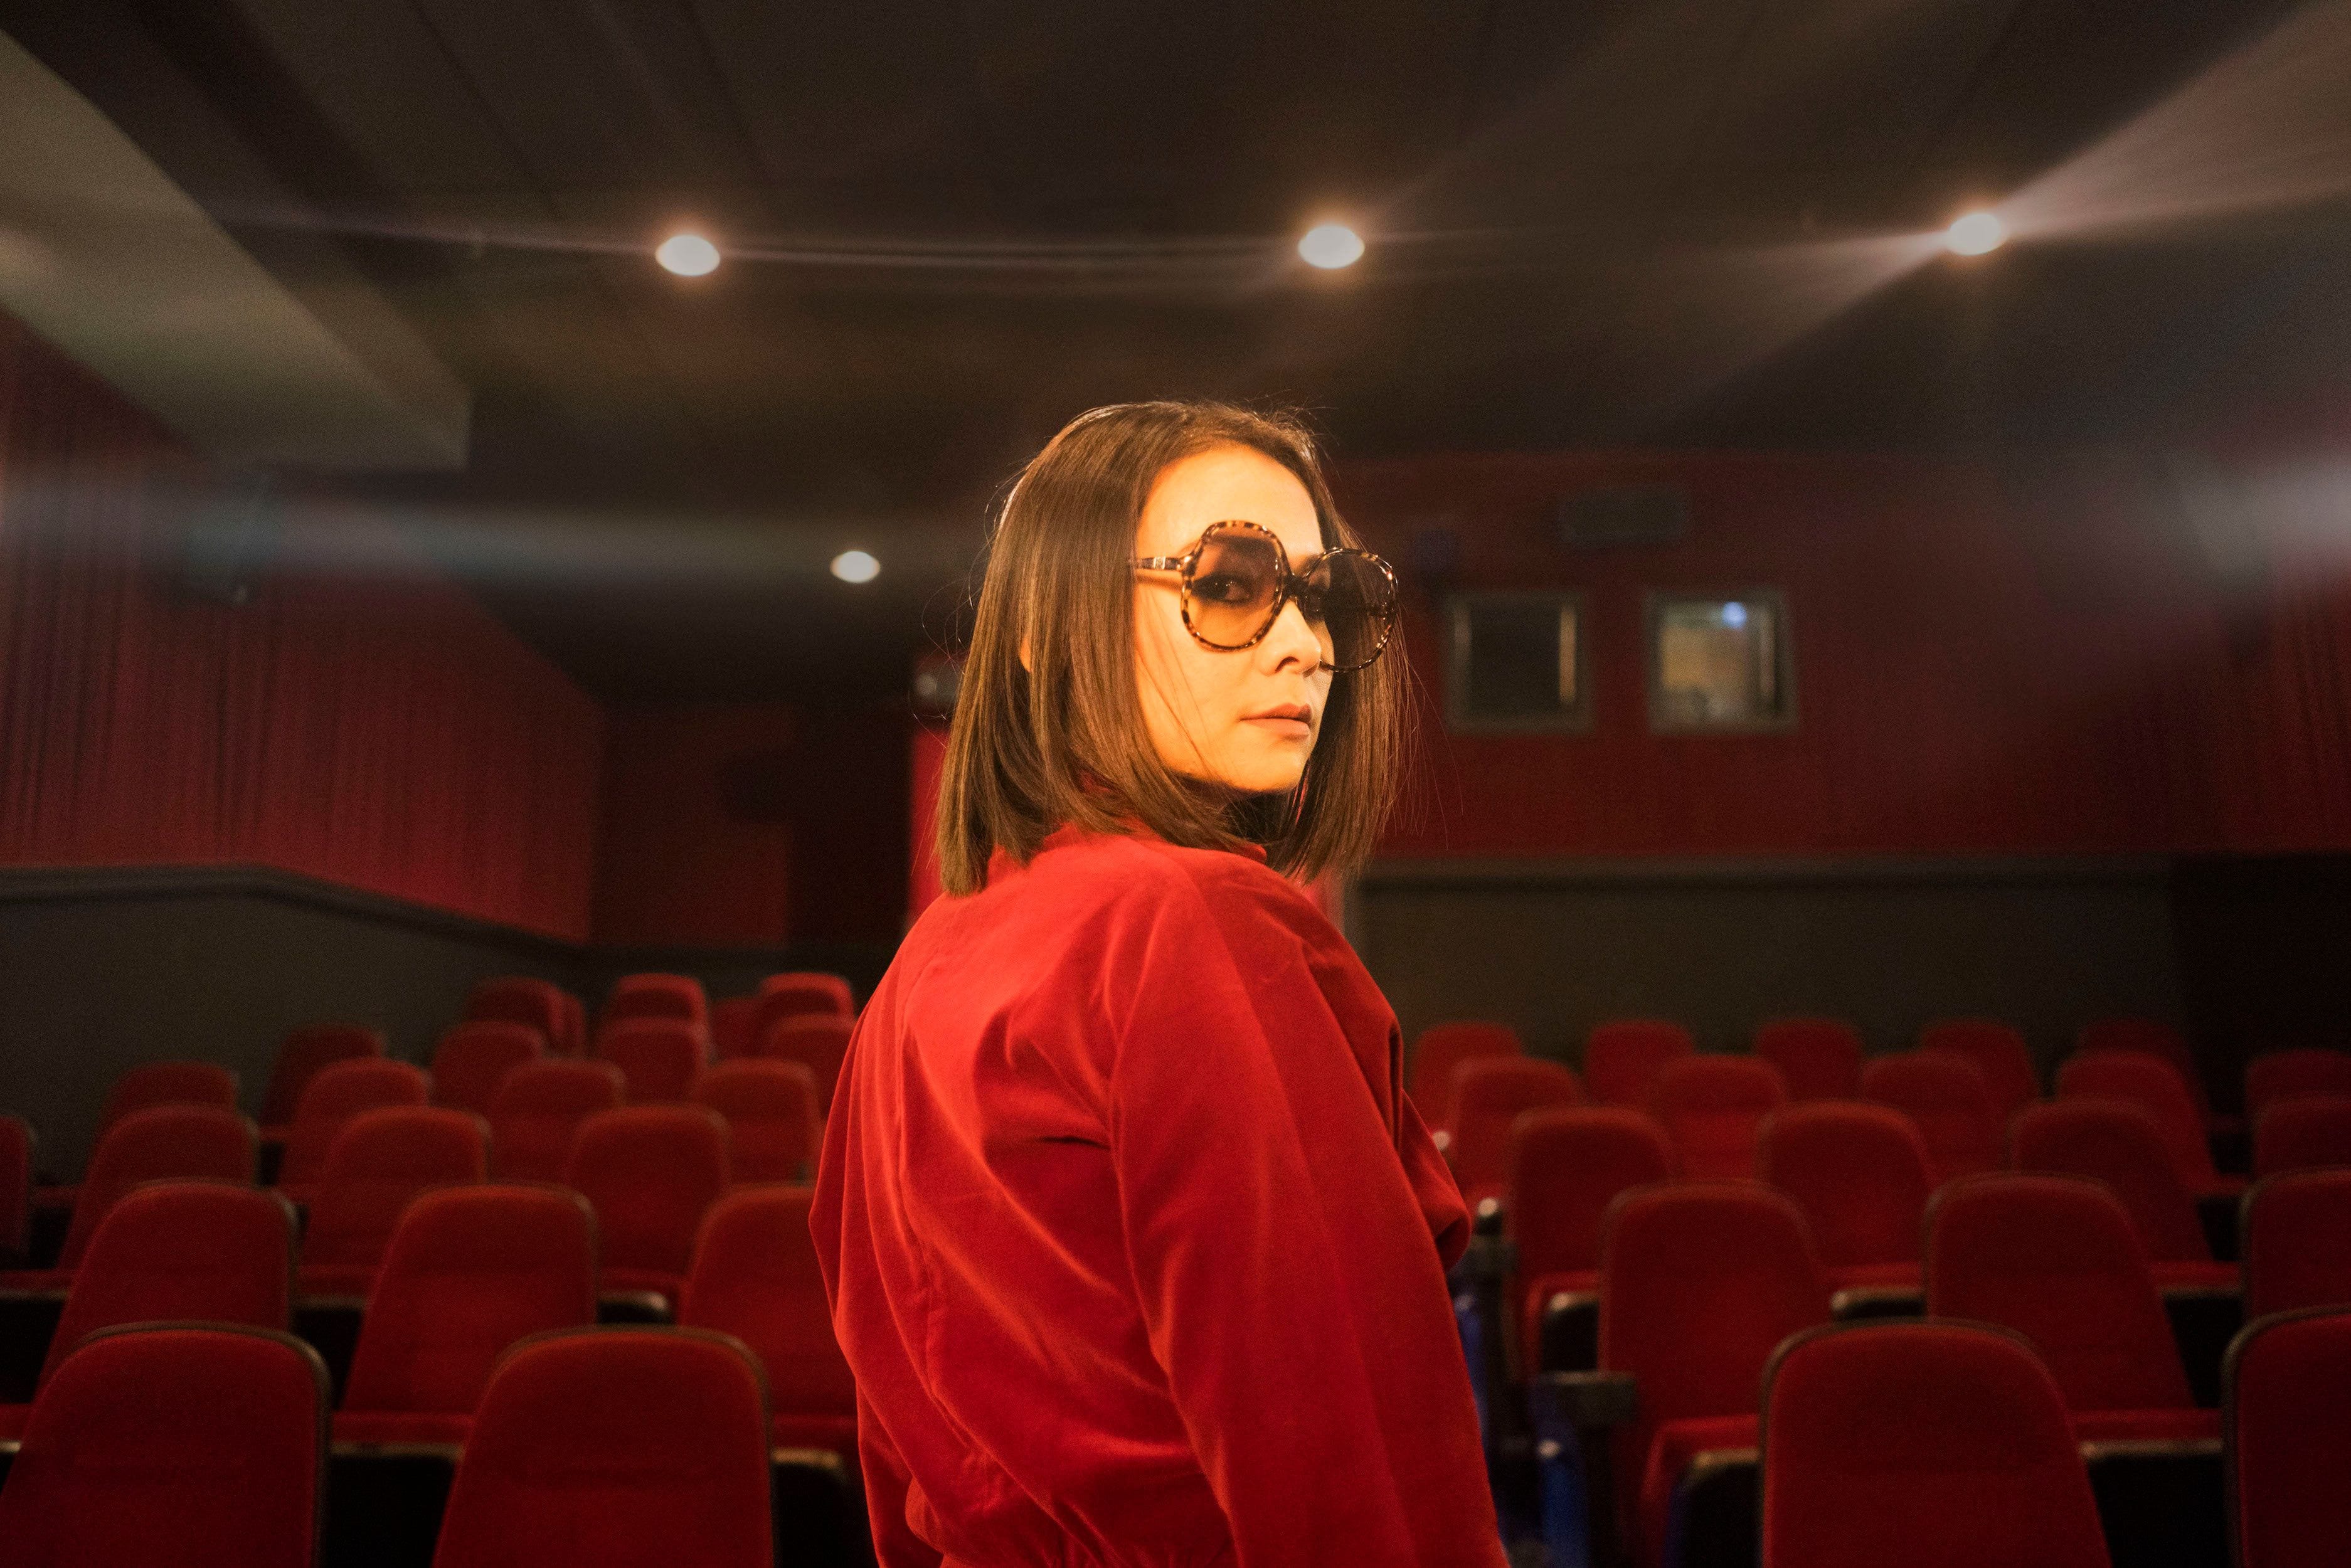 Mitski Shows How Independence Can Mean Loneliness on ‘Be the Cowboy’